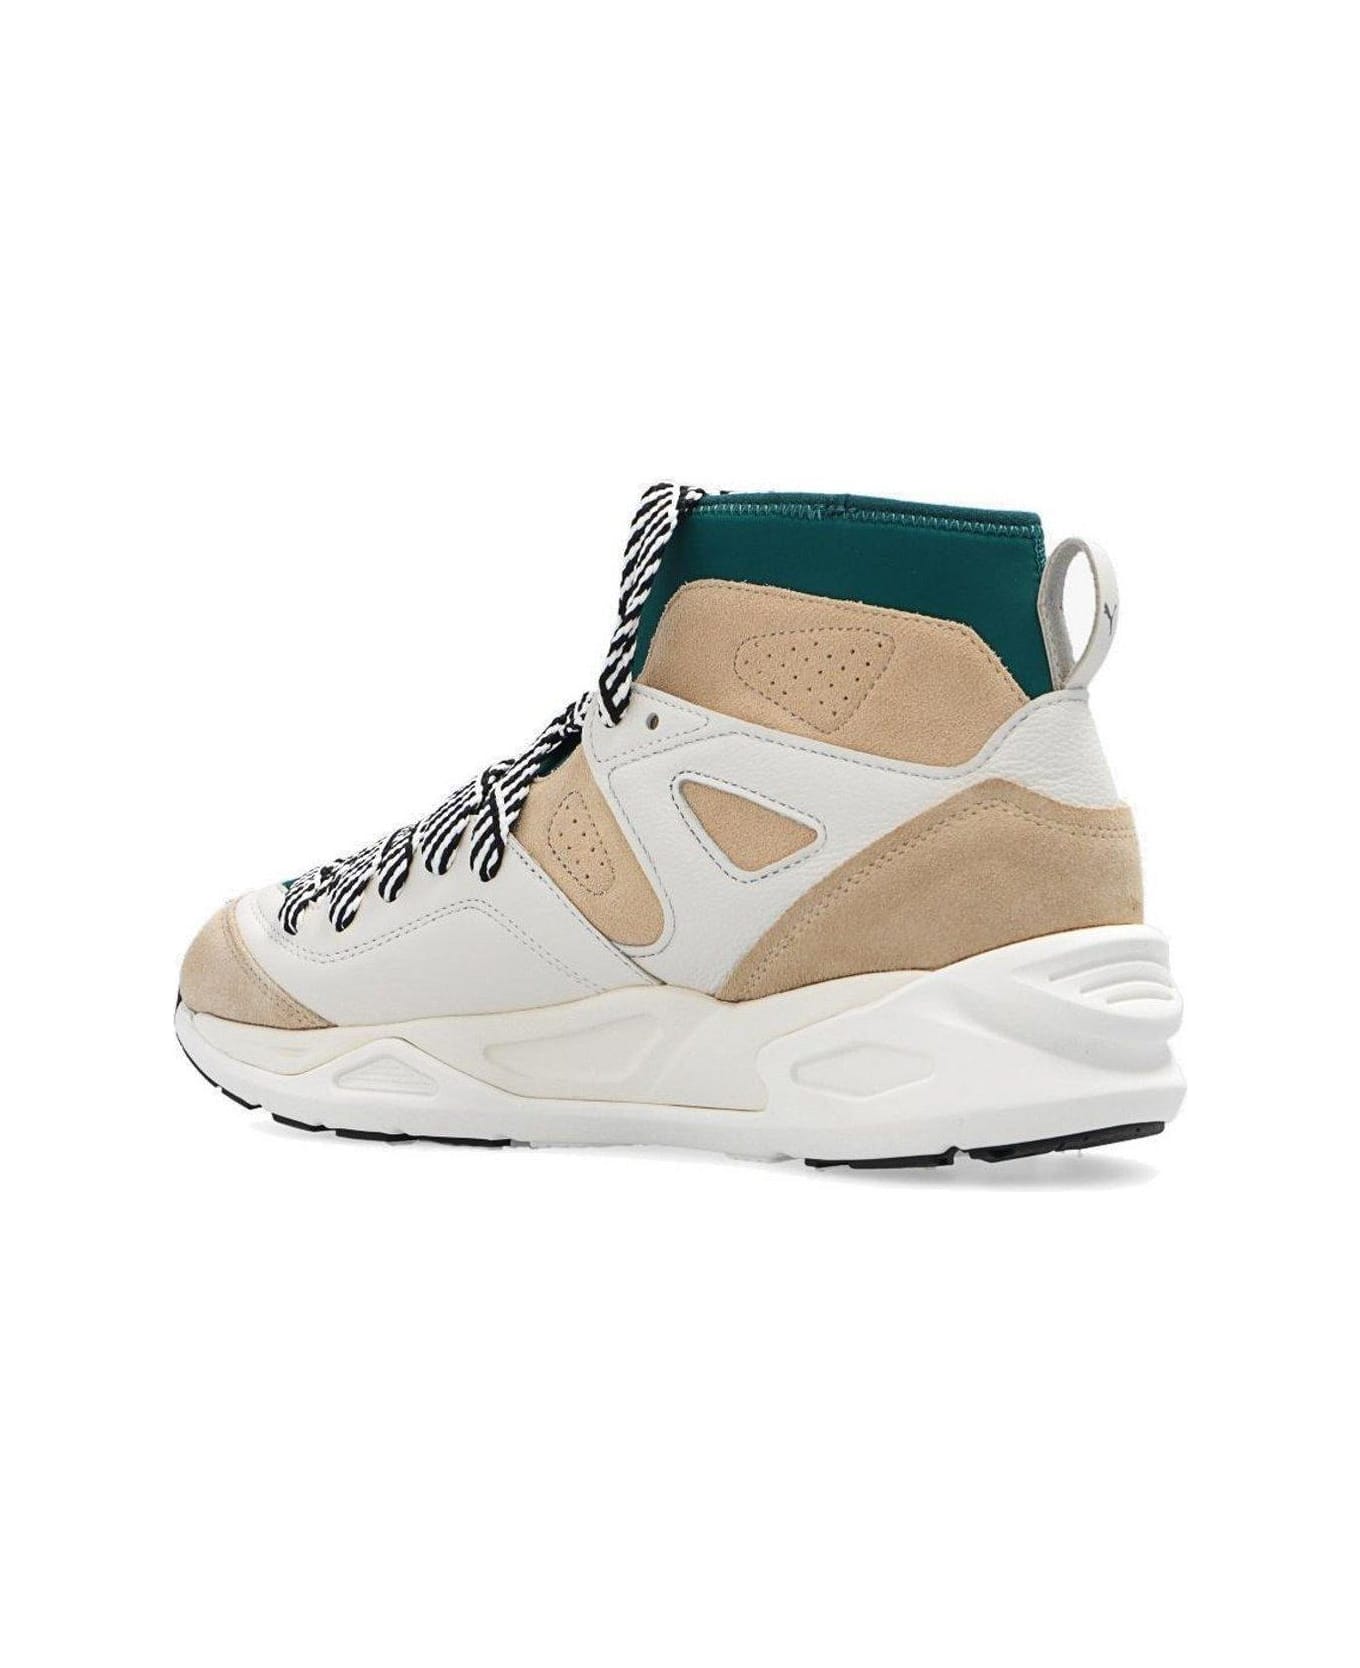 Puma X Ami Trc Blaze Mid Lace-up Sneakers - White スニーカー